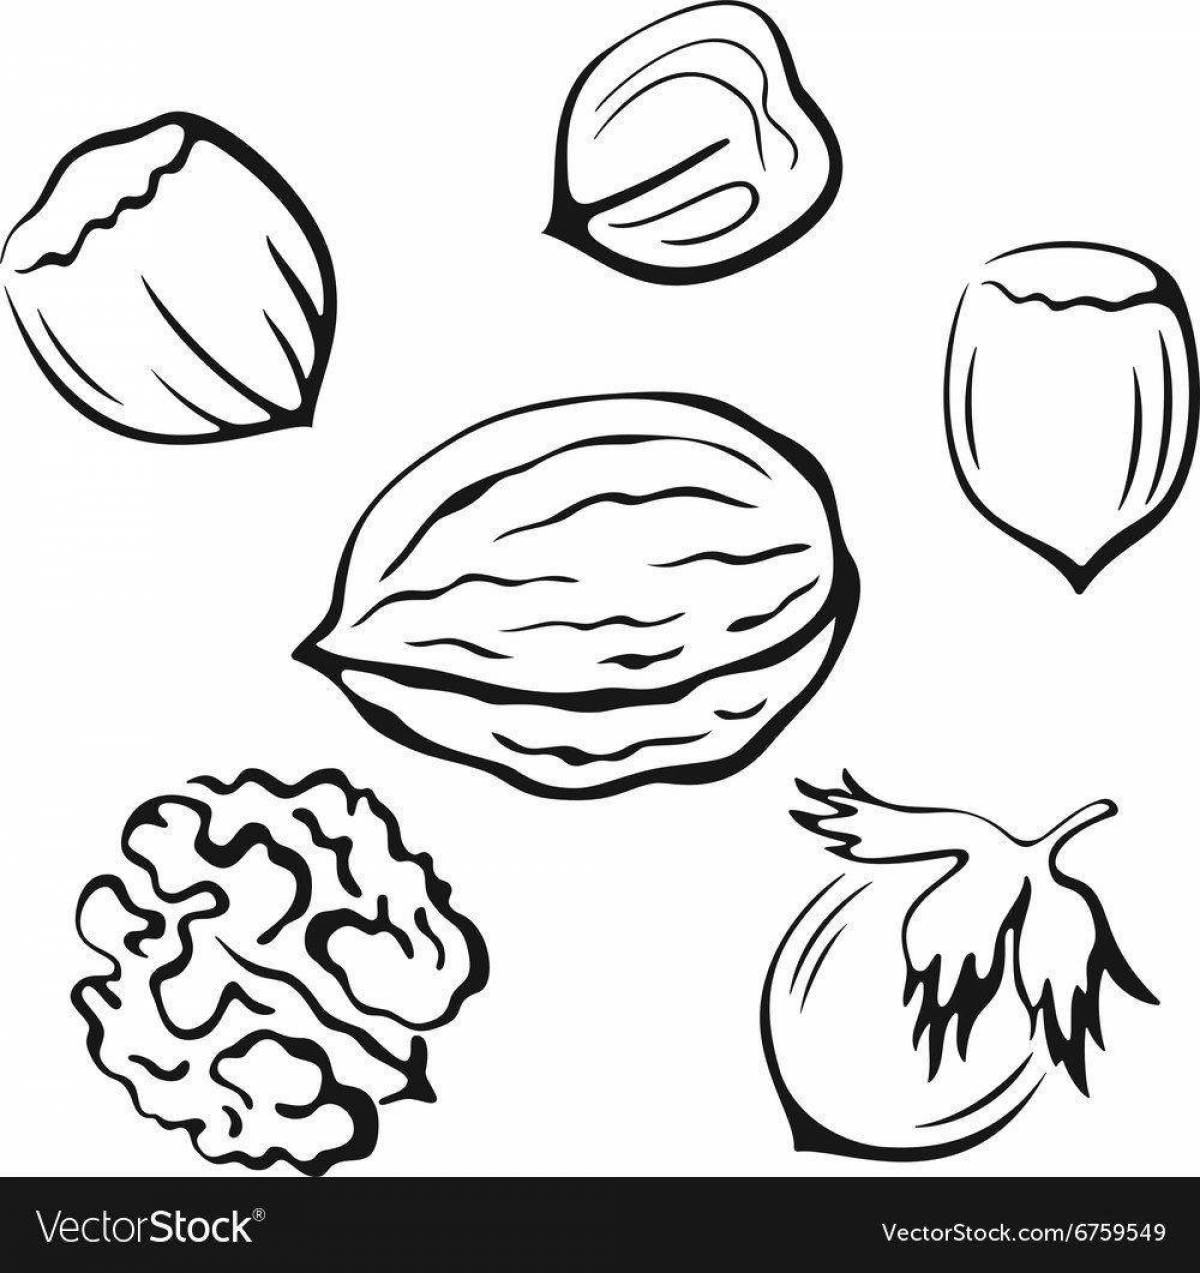 Glowing walnut coloring page